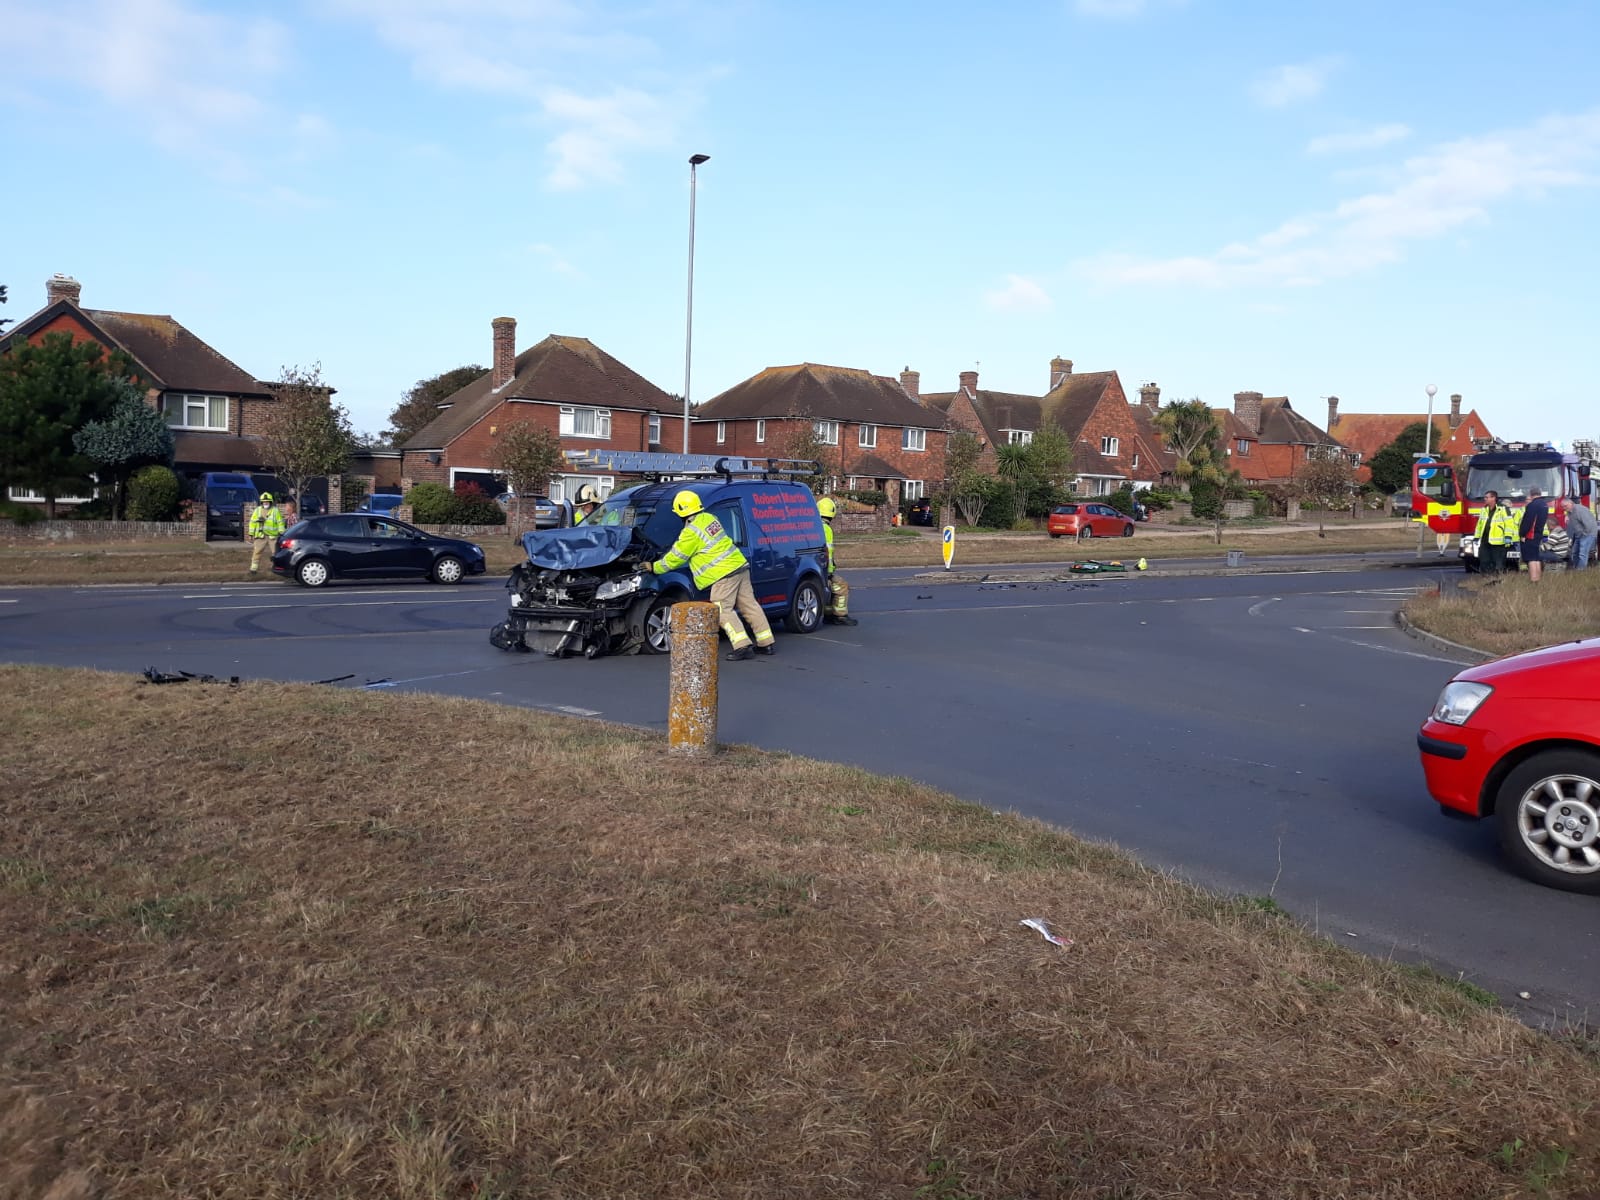 Fire brigade and police at A259 crash, Beacon Road, Seaford